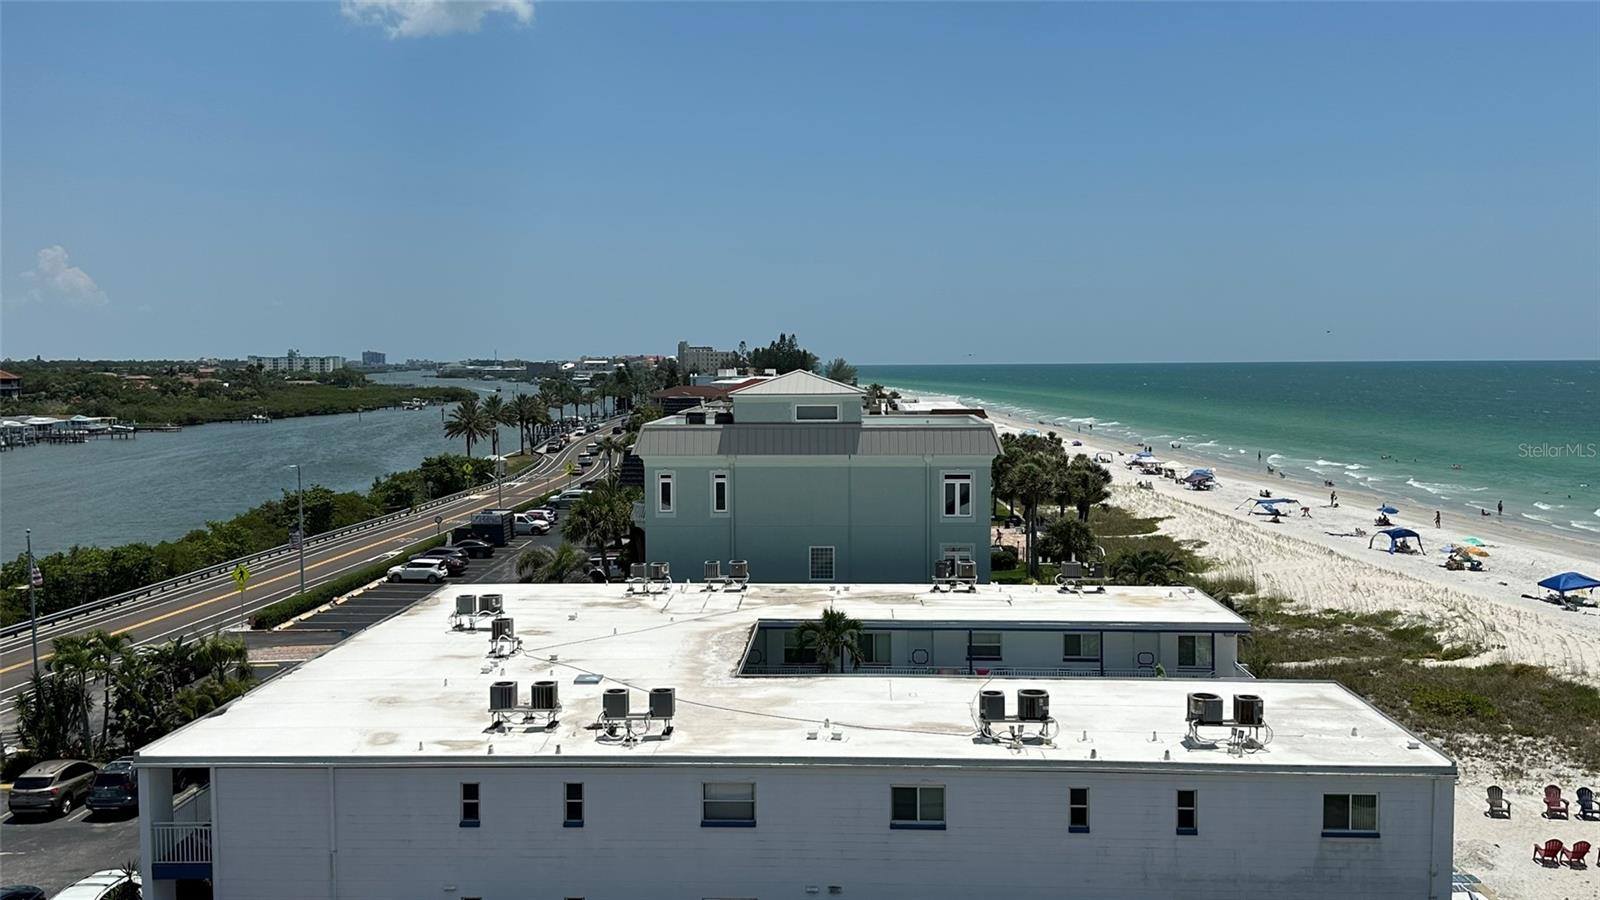 Roof view looking South with Intercoastal on left and Gulf of Mexico on Right